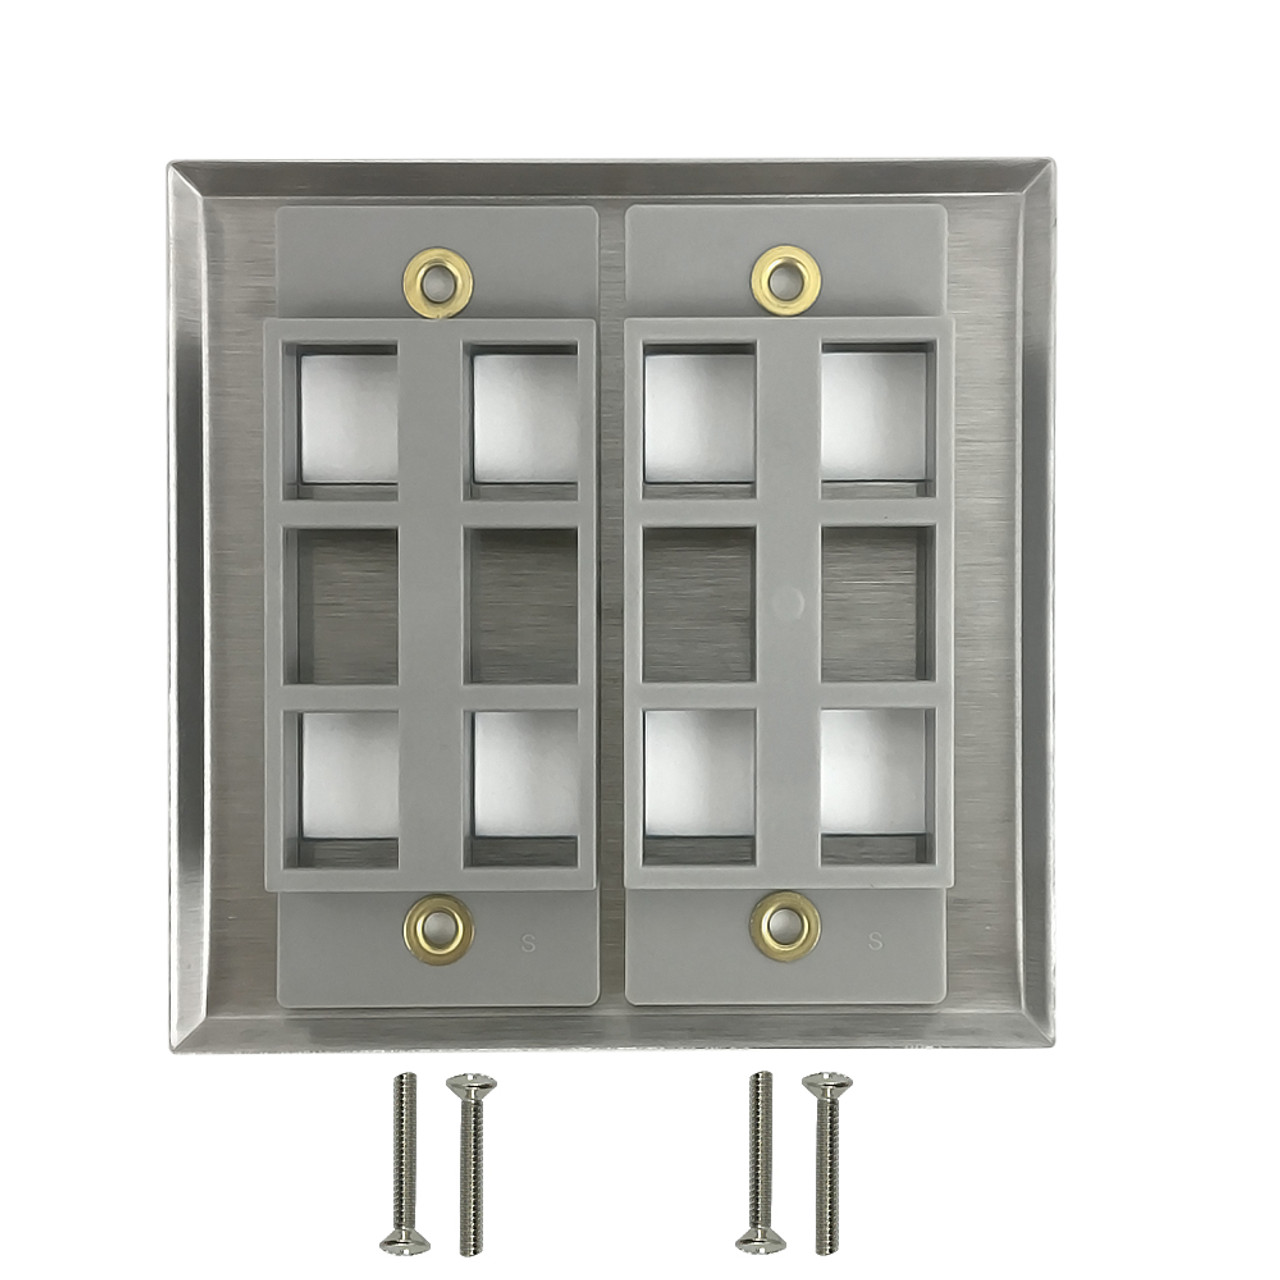 Double Gang 8 Port Keystone Stainless Steel Wall Plate1